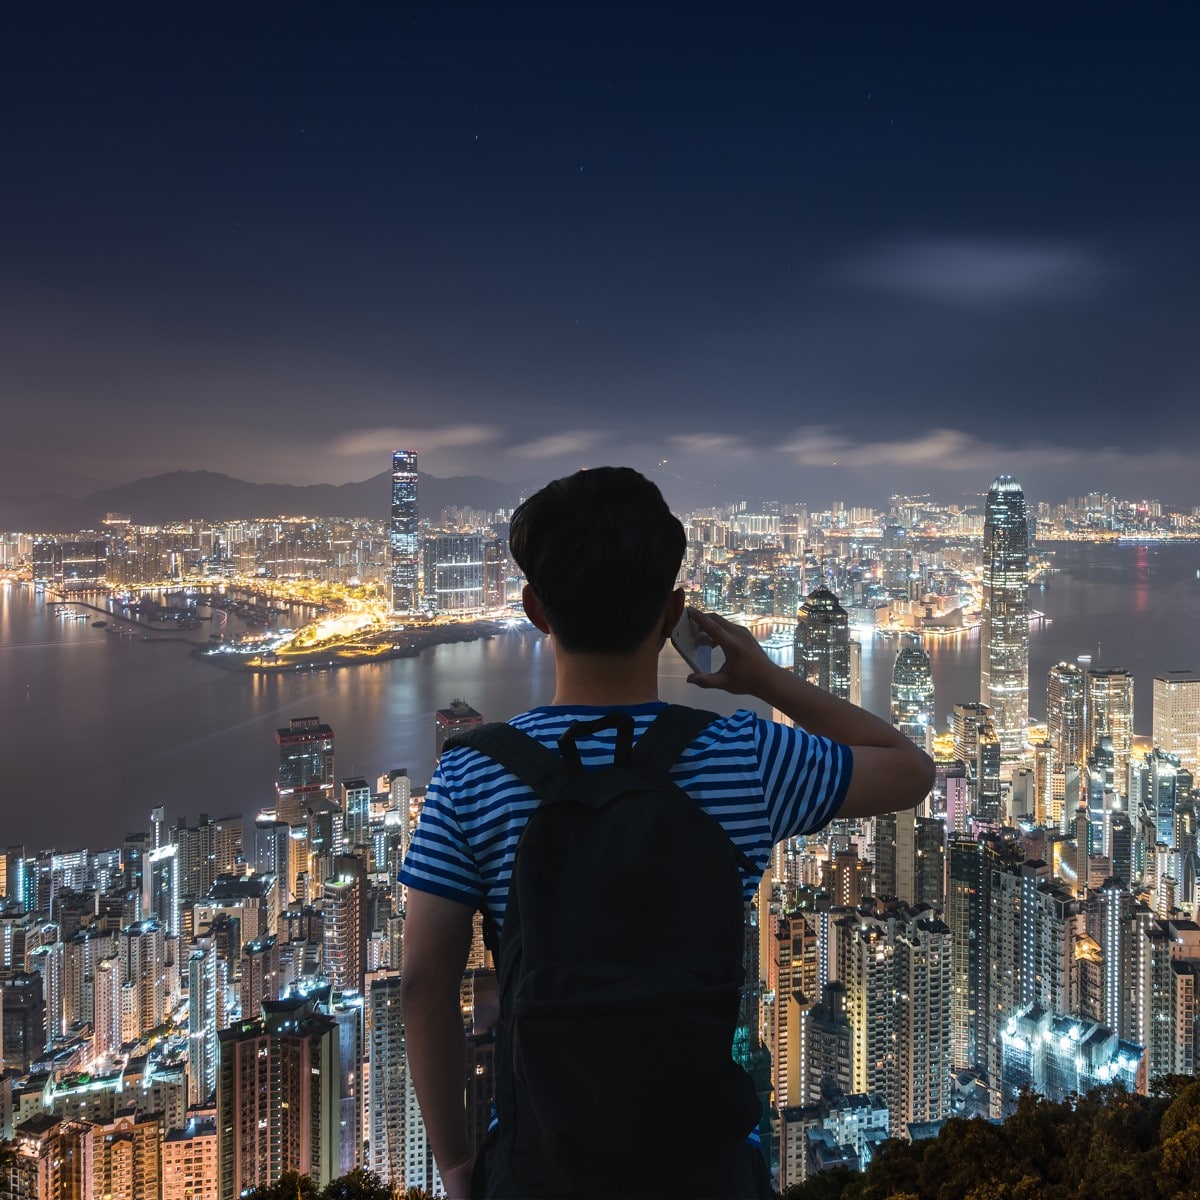 boy on cellphone overlooking lite up city at night